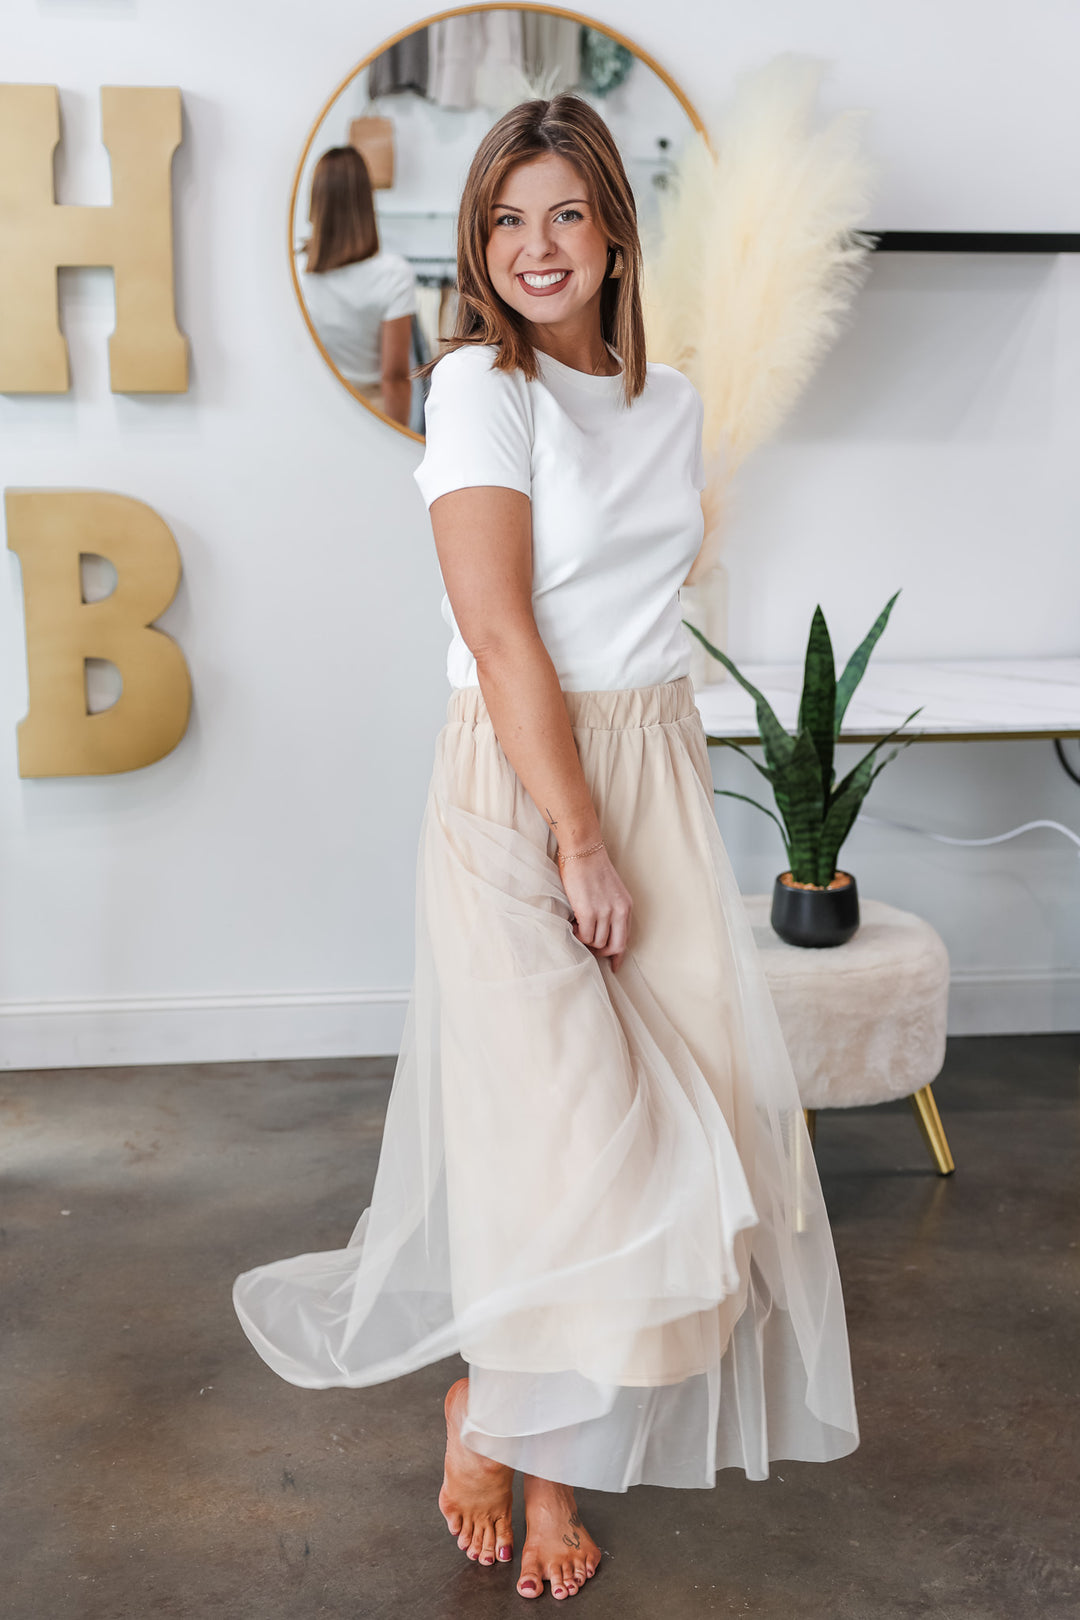 A brunette woman standing in a shop wearing a champagne colored tulle skirt with a basic white tee.